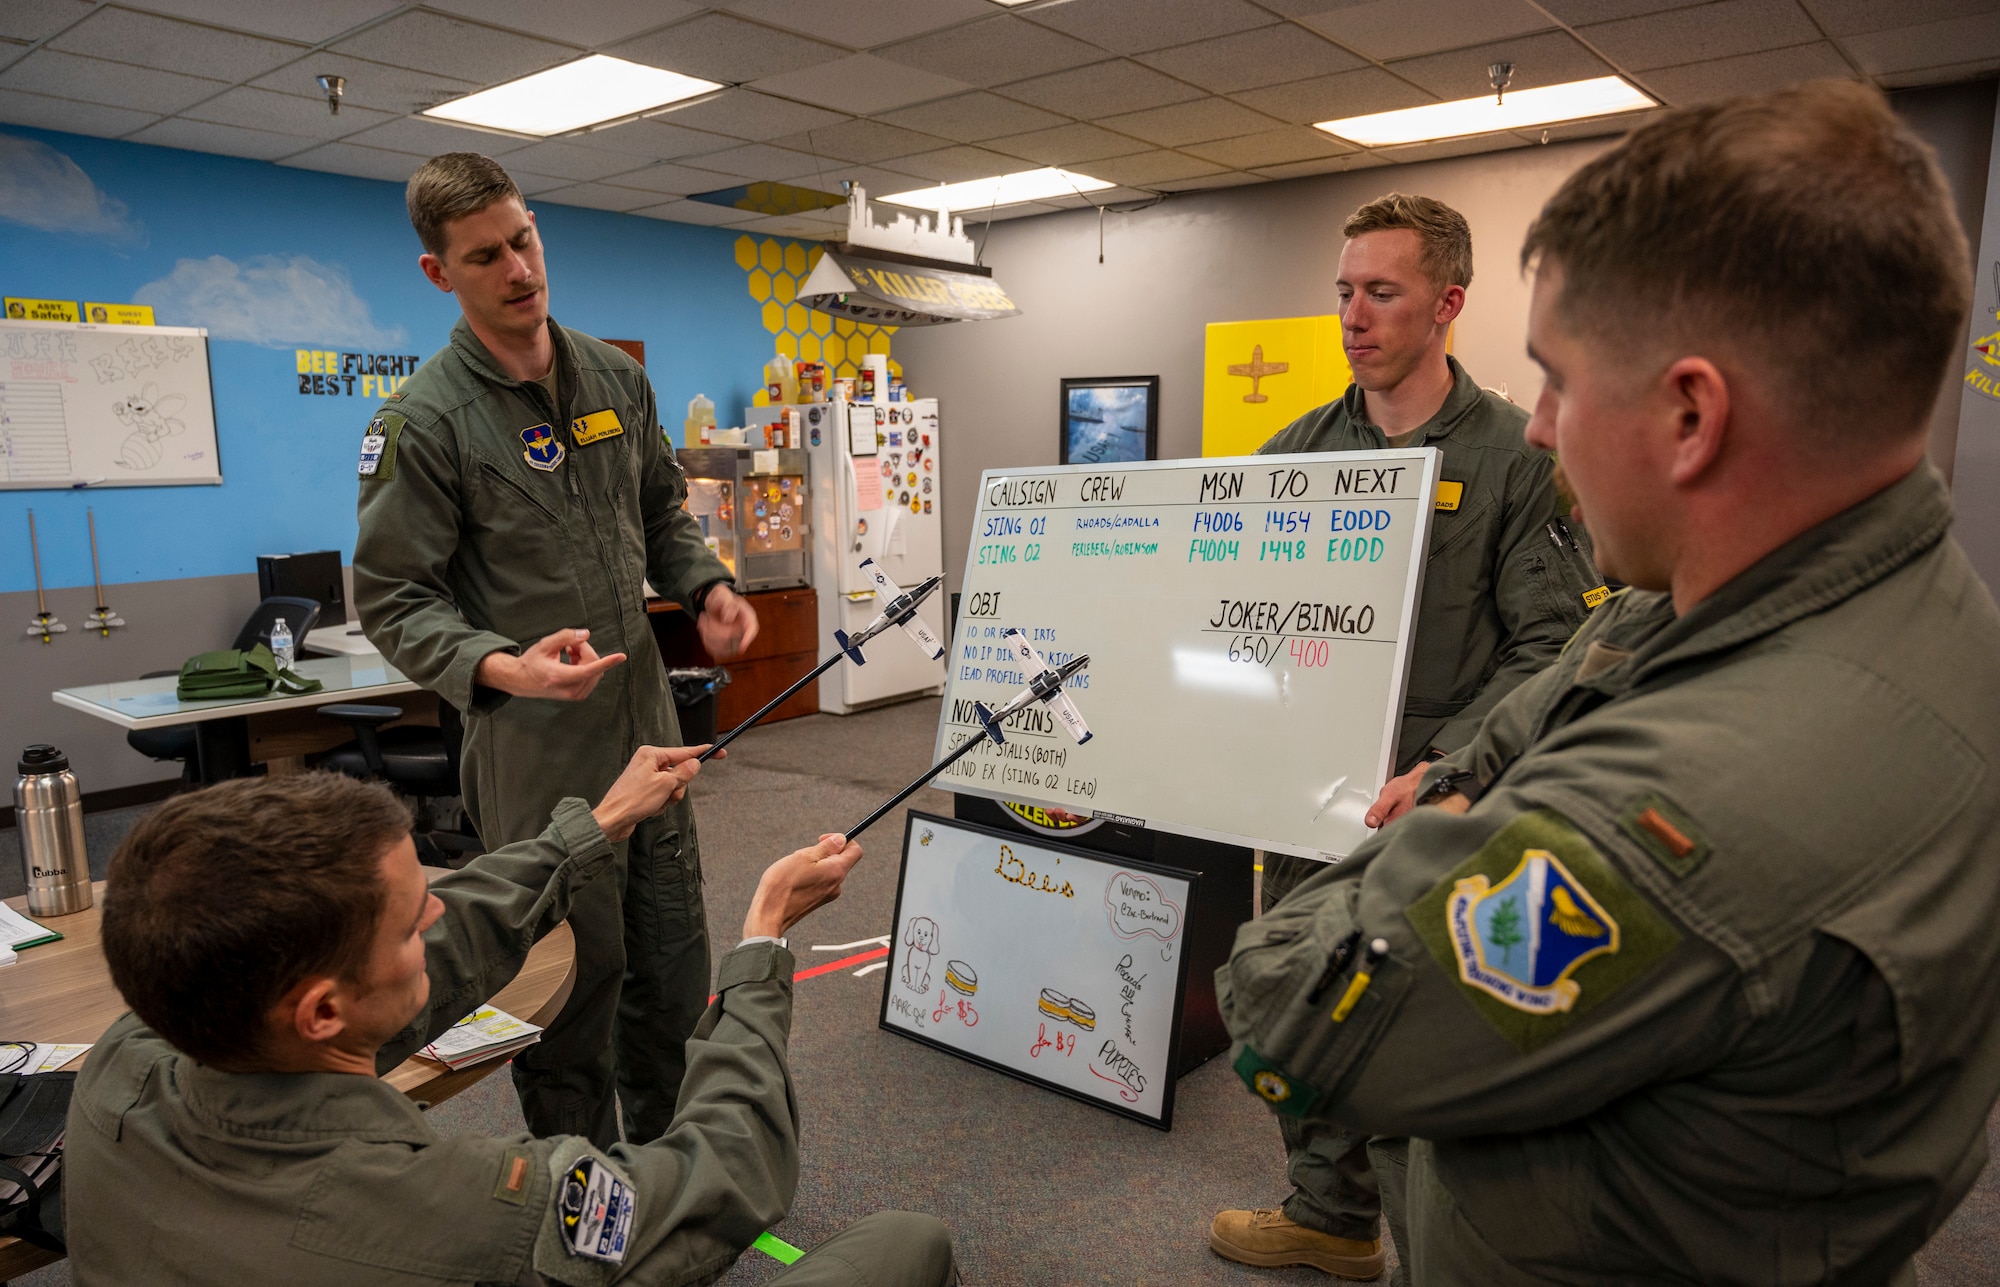 Students from the 85th Flying Training Squadron Bee Flight use model aircraft to simulate maneuvers in the classroom on March 30 2021 at Laughlin Air Force Base, Texas. The model aircraft help student pilots get a 3rd person view and idea of how the planes will work. (U.S. Air Force photo by Senior Airman Nicholas Larsen)